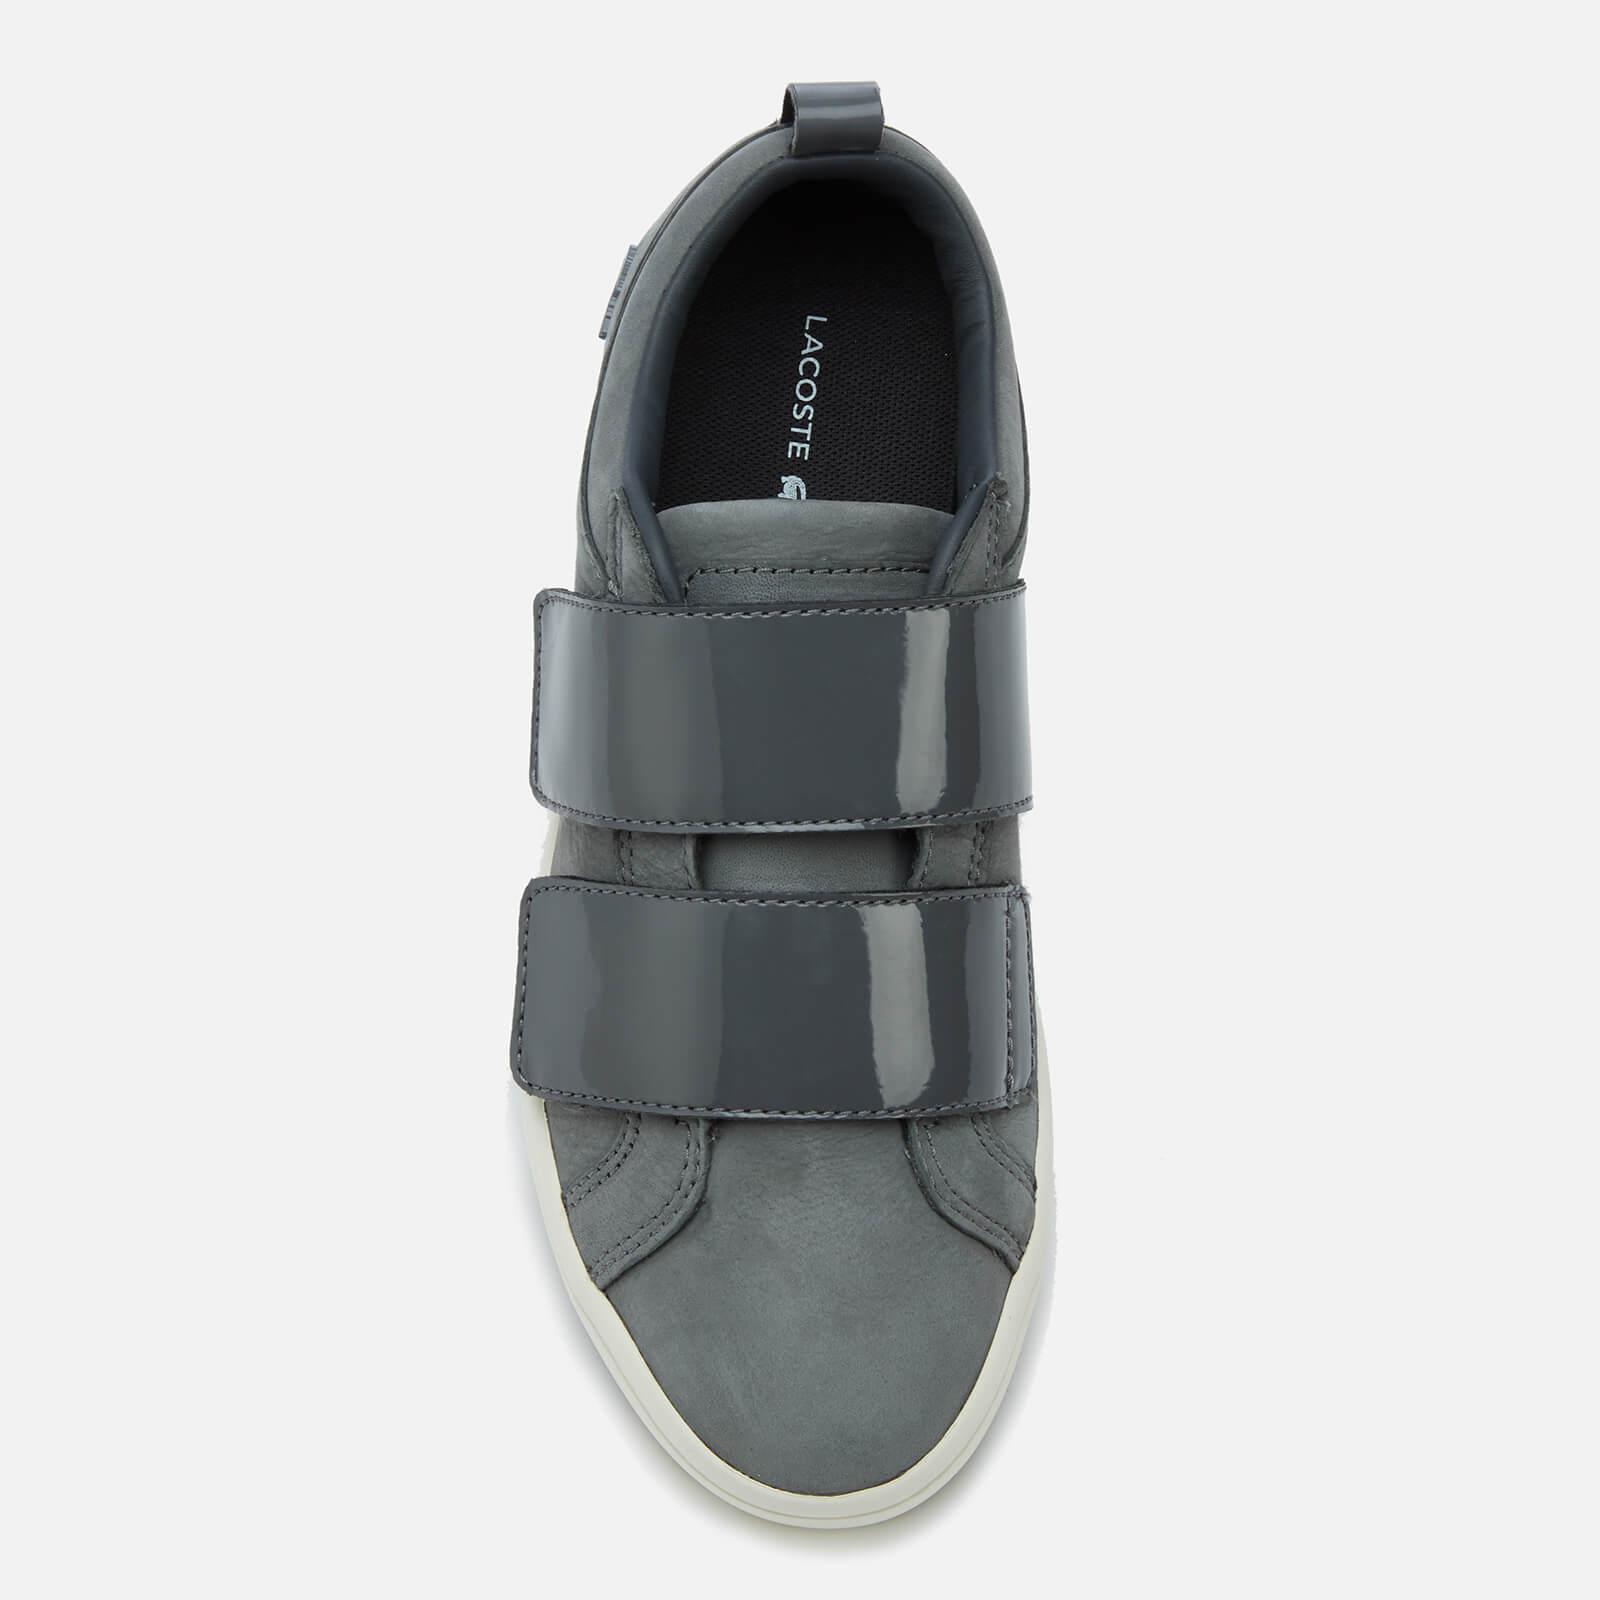 Lacoste Leather Straightset Strap 318 1 Nubuck Trainers in Grey (Gray) -  Lyst